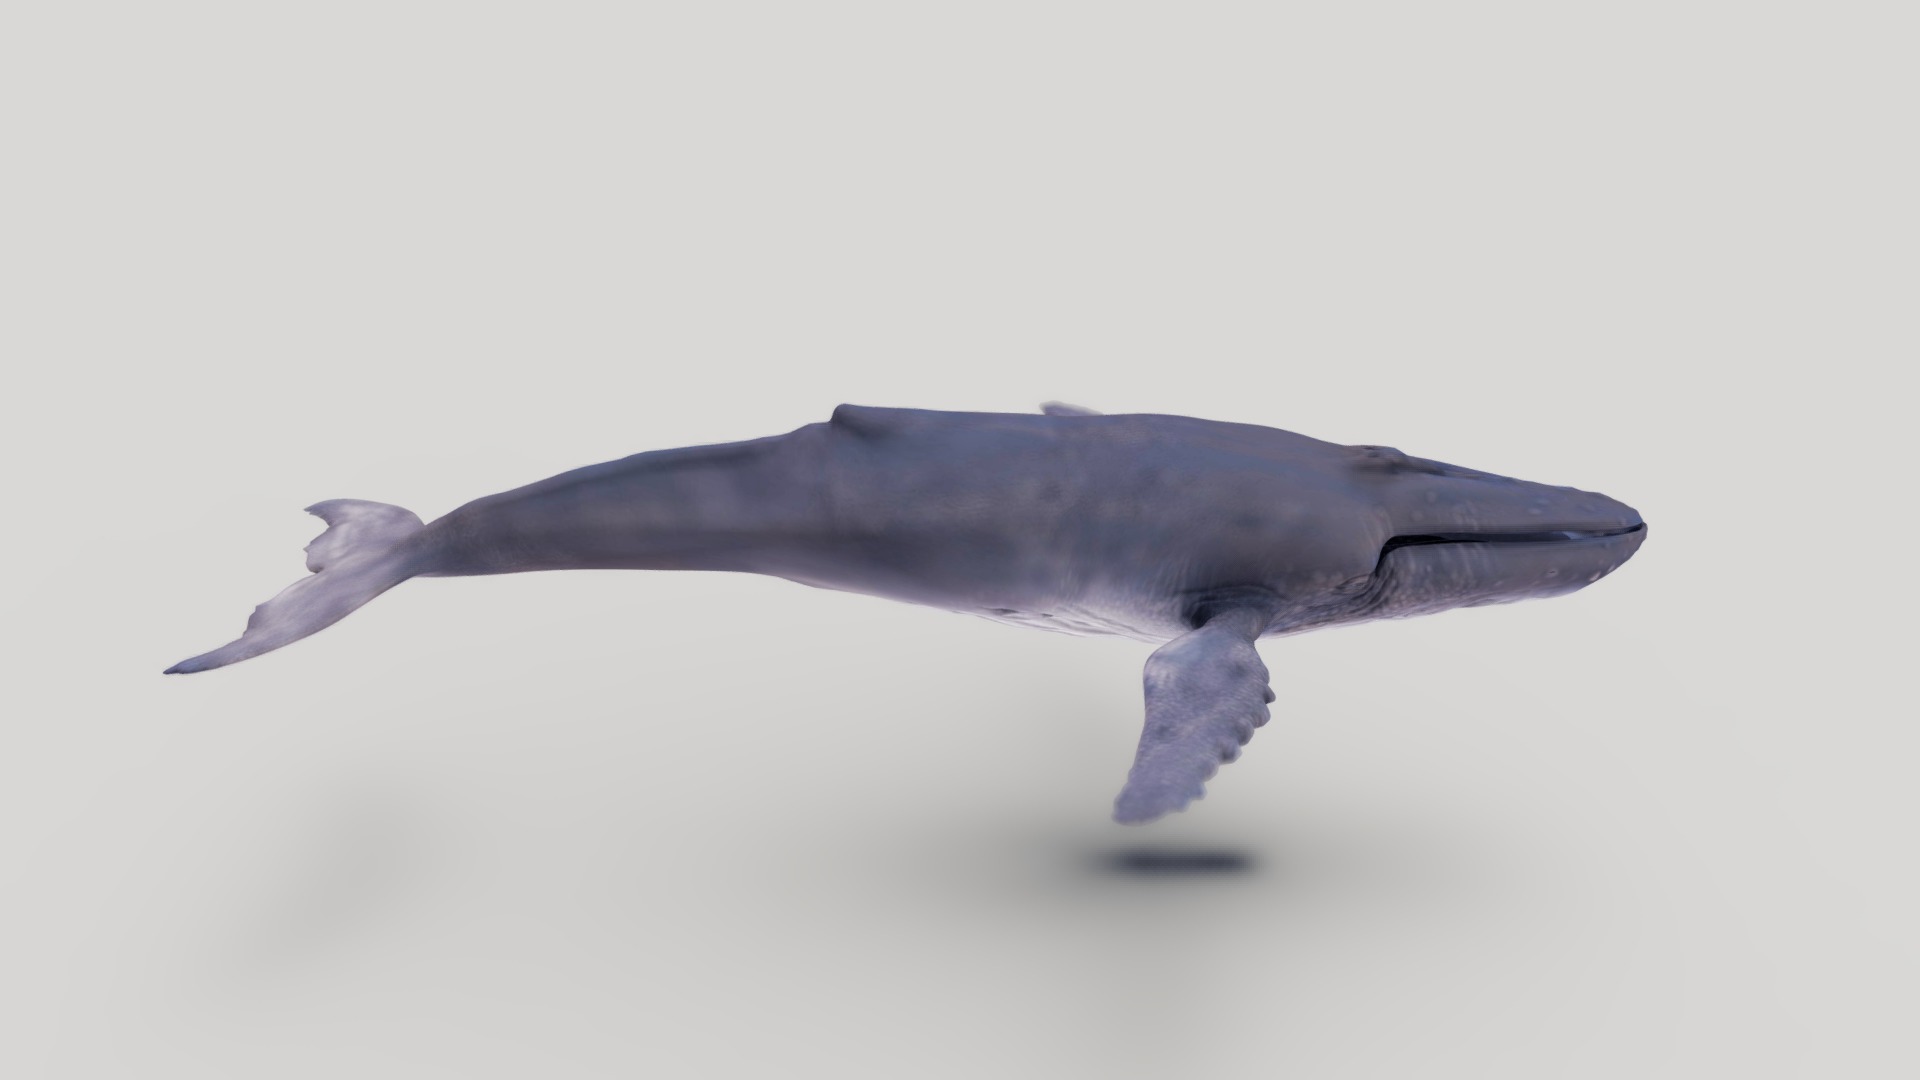 3D model WIP humpback whale - This is a 3D model of the WIP humpback whale. The 3D model is about a dolphin swimming in the water.